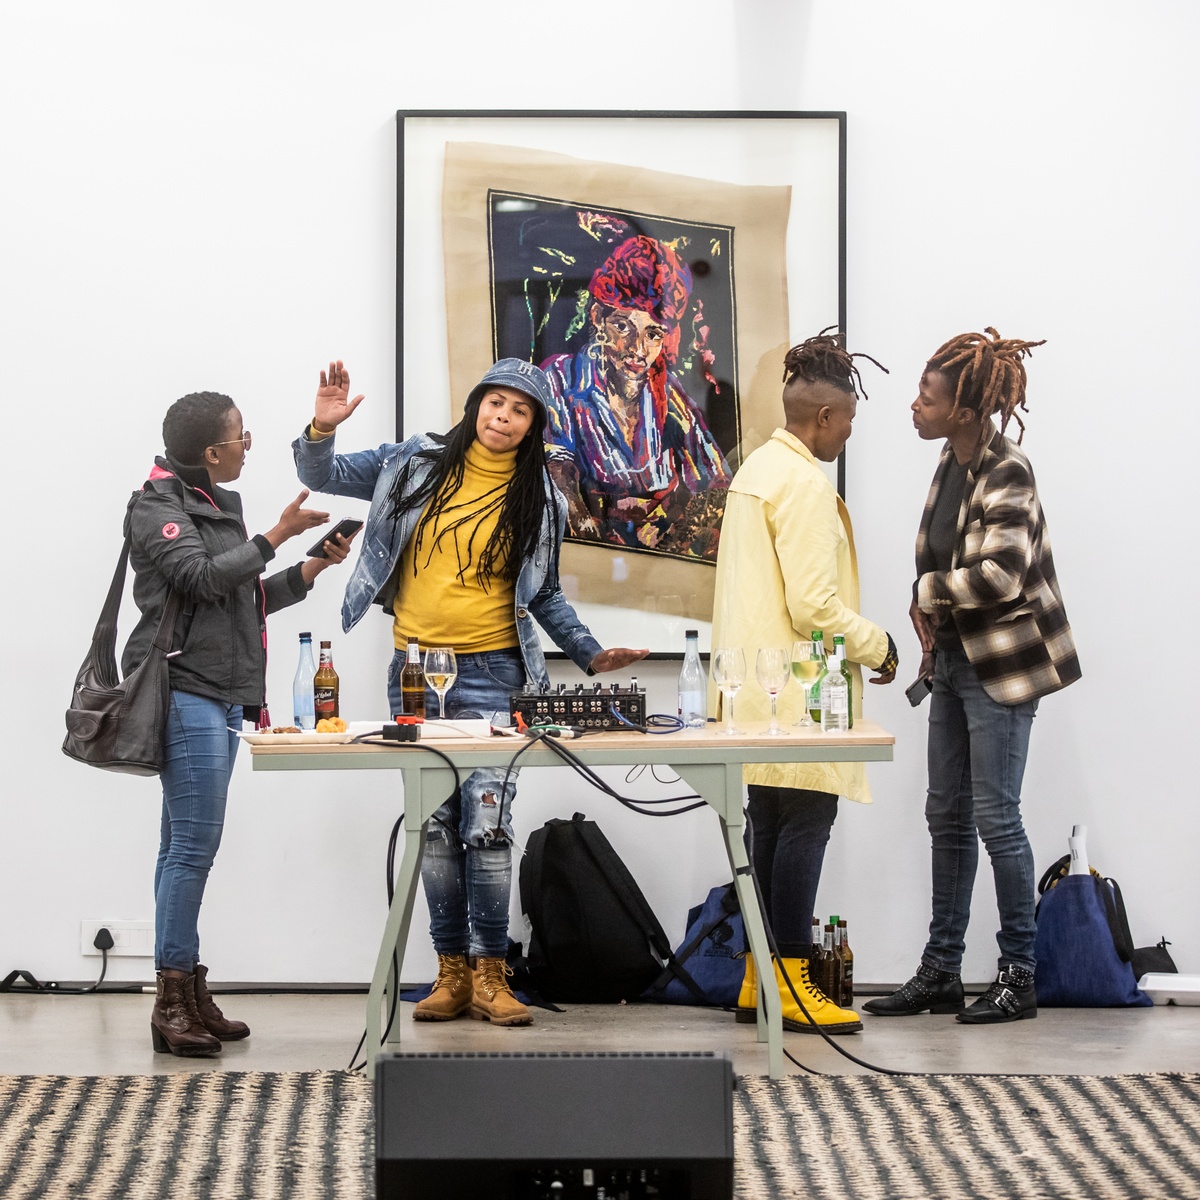 Event photograph from the opening of the “Ikhono LaseNatali” exhibition in A4’s Gallery. At the back, Athi-Patra Ruga’s crocheted work “Arab Boy (after Irma Stern)” is mounted on the gallery wall. At the front, four individuals stand behind a desk with audio equipment.
